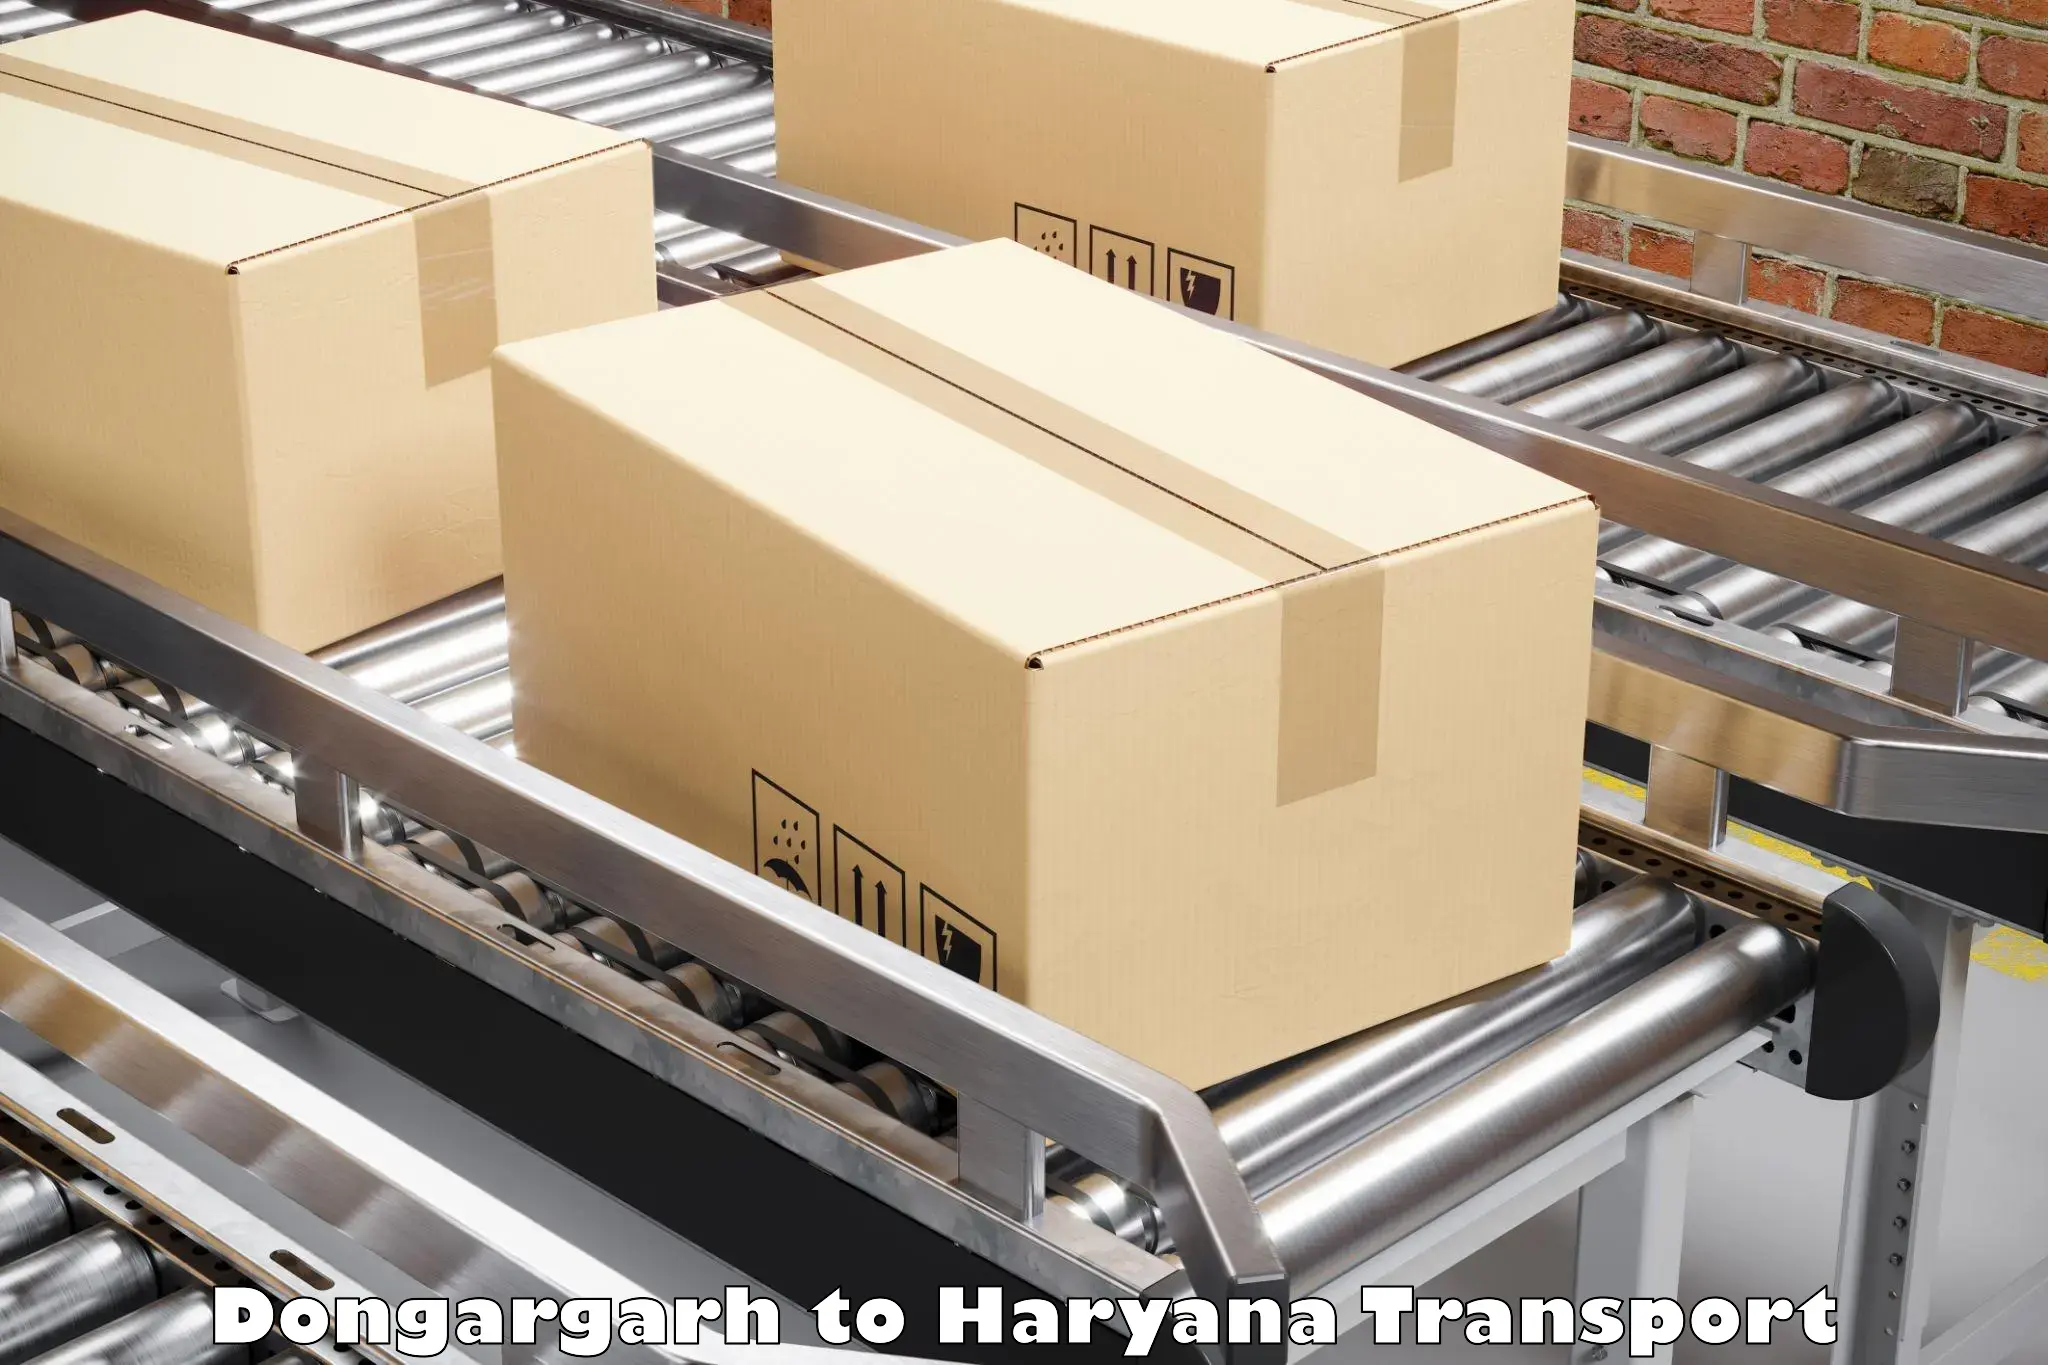 Parcel transport services Dongargarh to Chaudhary Charan Singh Haryana Agricultural University Hisar